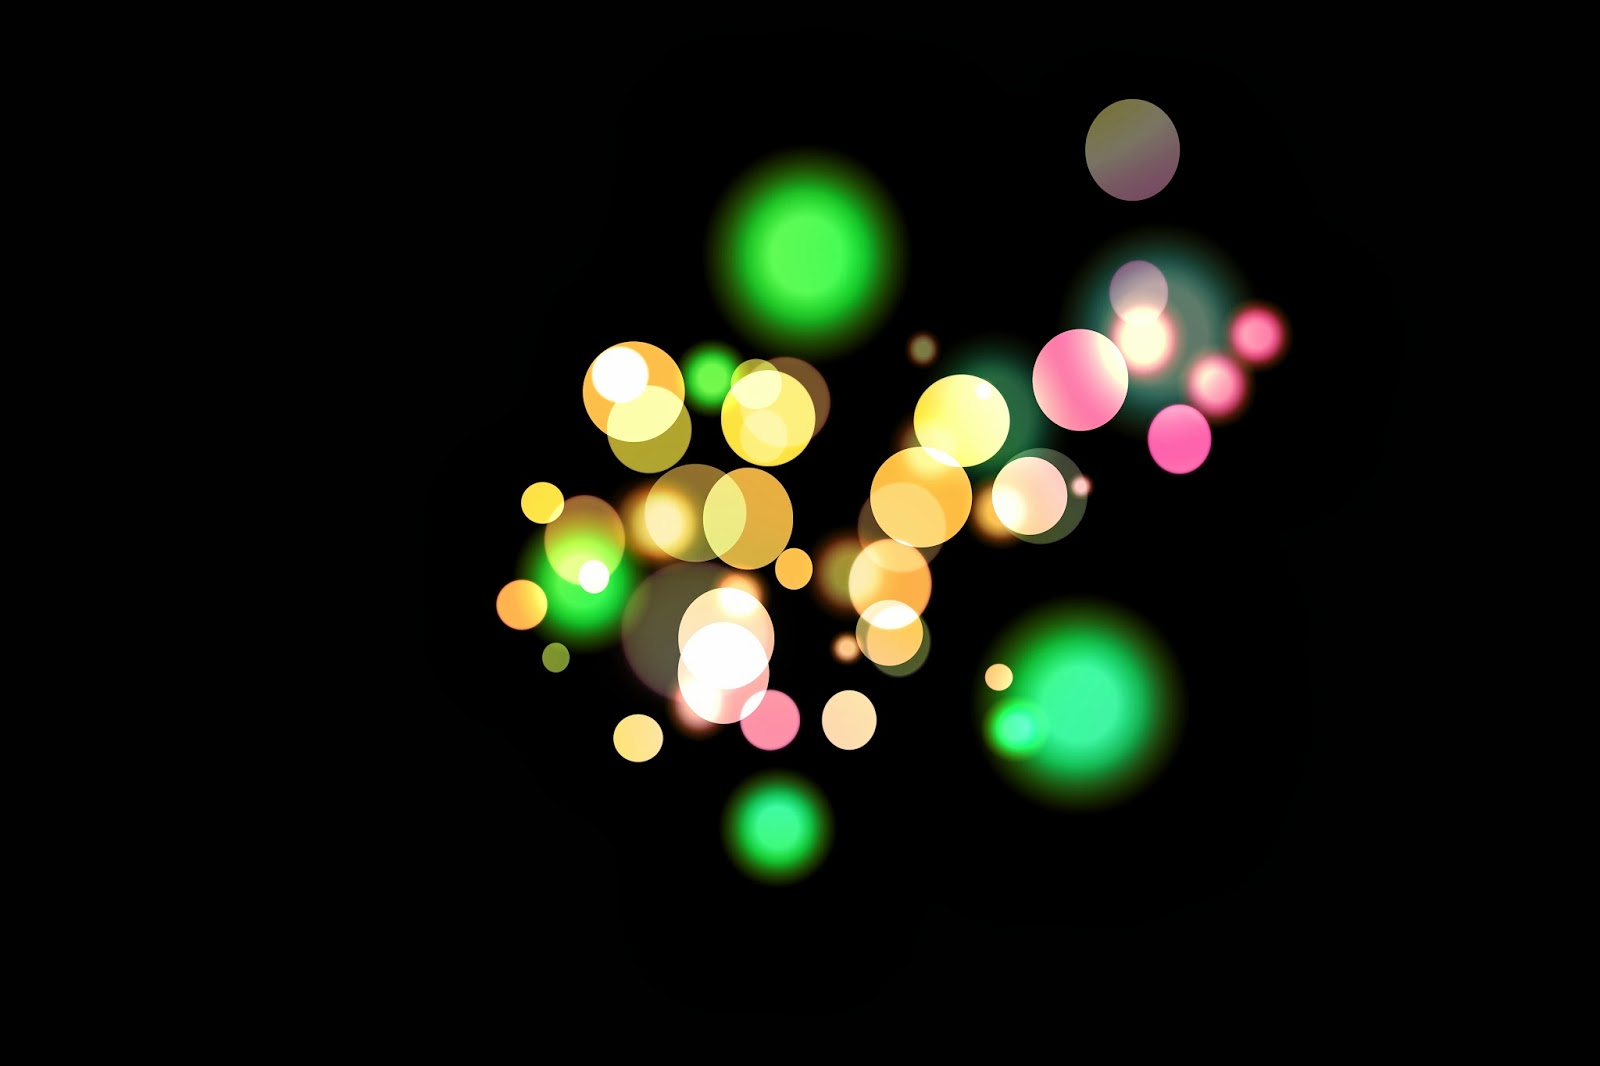 bokeh brushes for photoshop cs6 free download